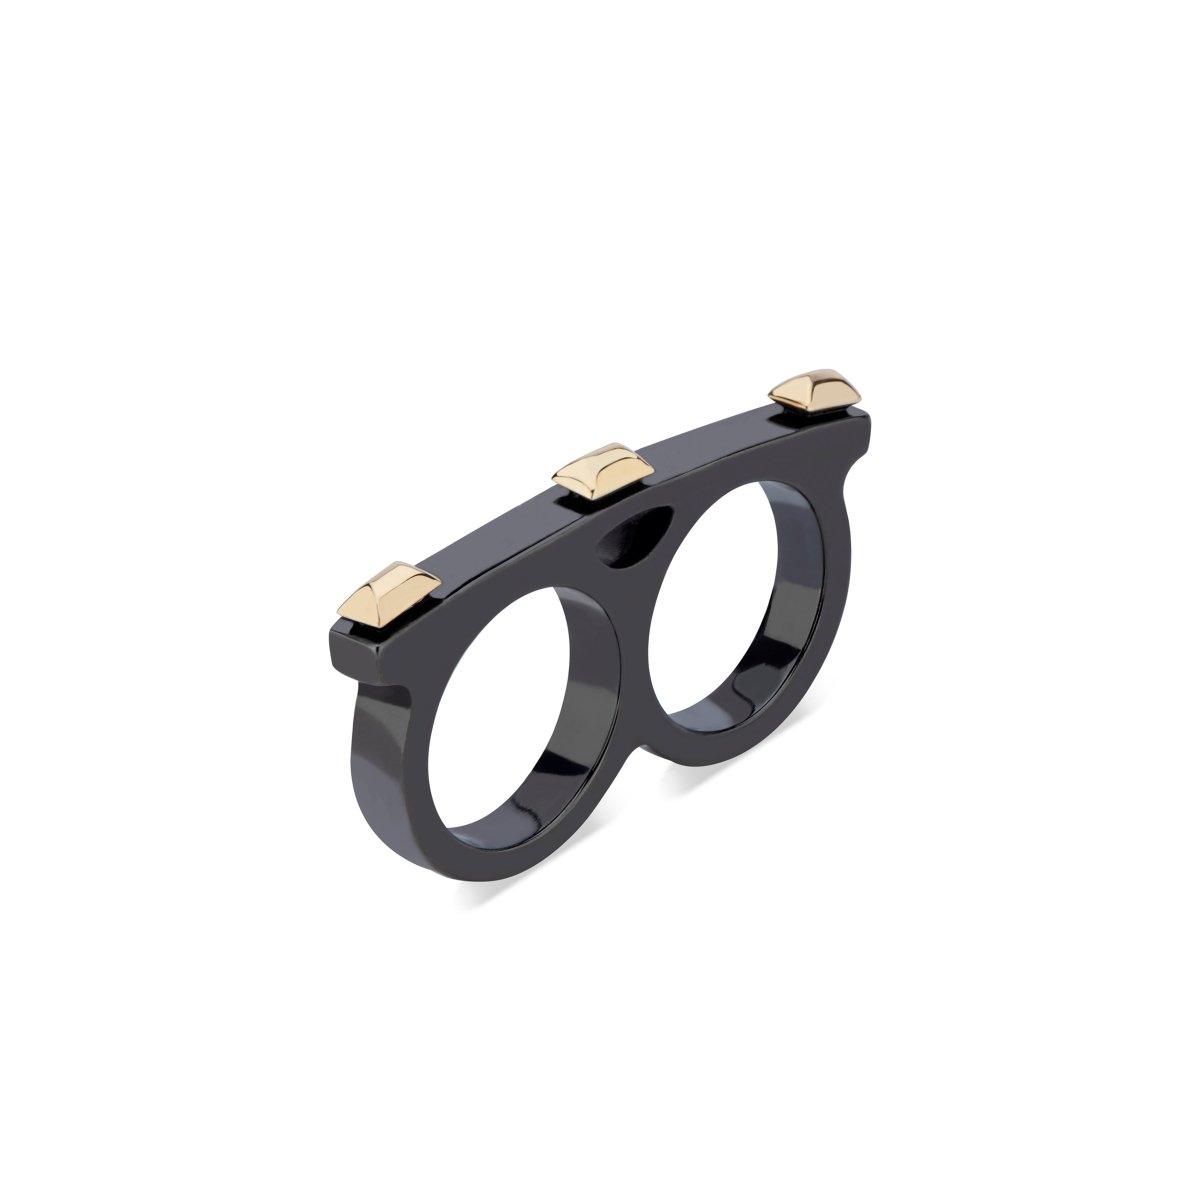 Black Rhodium Sparks Fly Matchstick Ring - Nataly Aponte